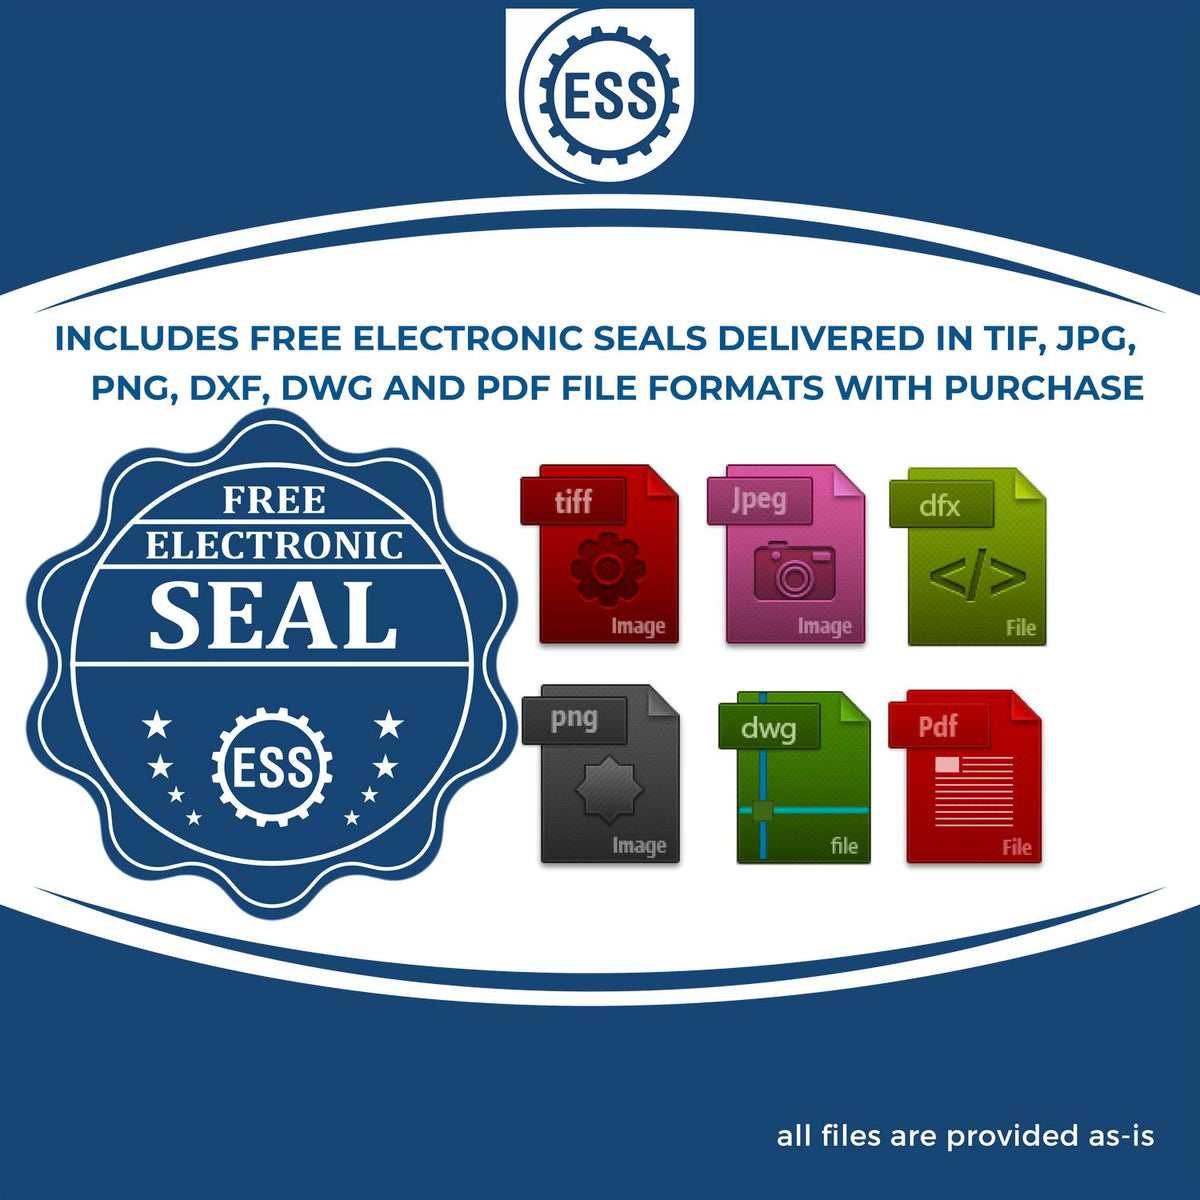 An infographic for the free electronic seal for the Heavy-Duty Florida Rectangular Notary Stamp illustrating the different file type icons such as DXF, DWG, TIF, JPG and PNG.